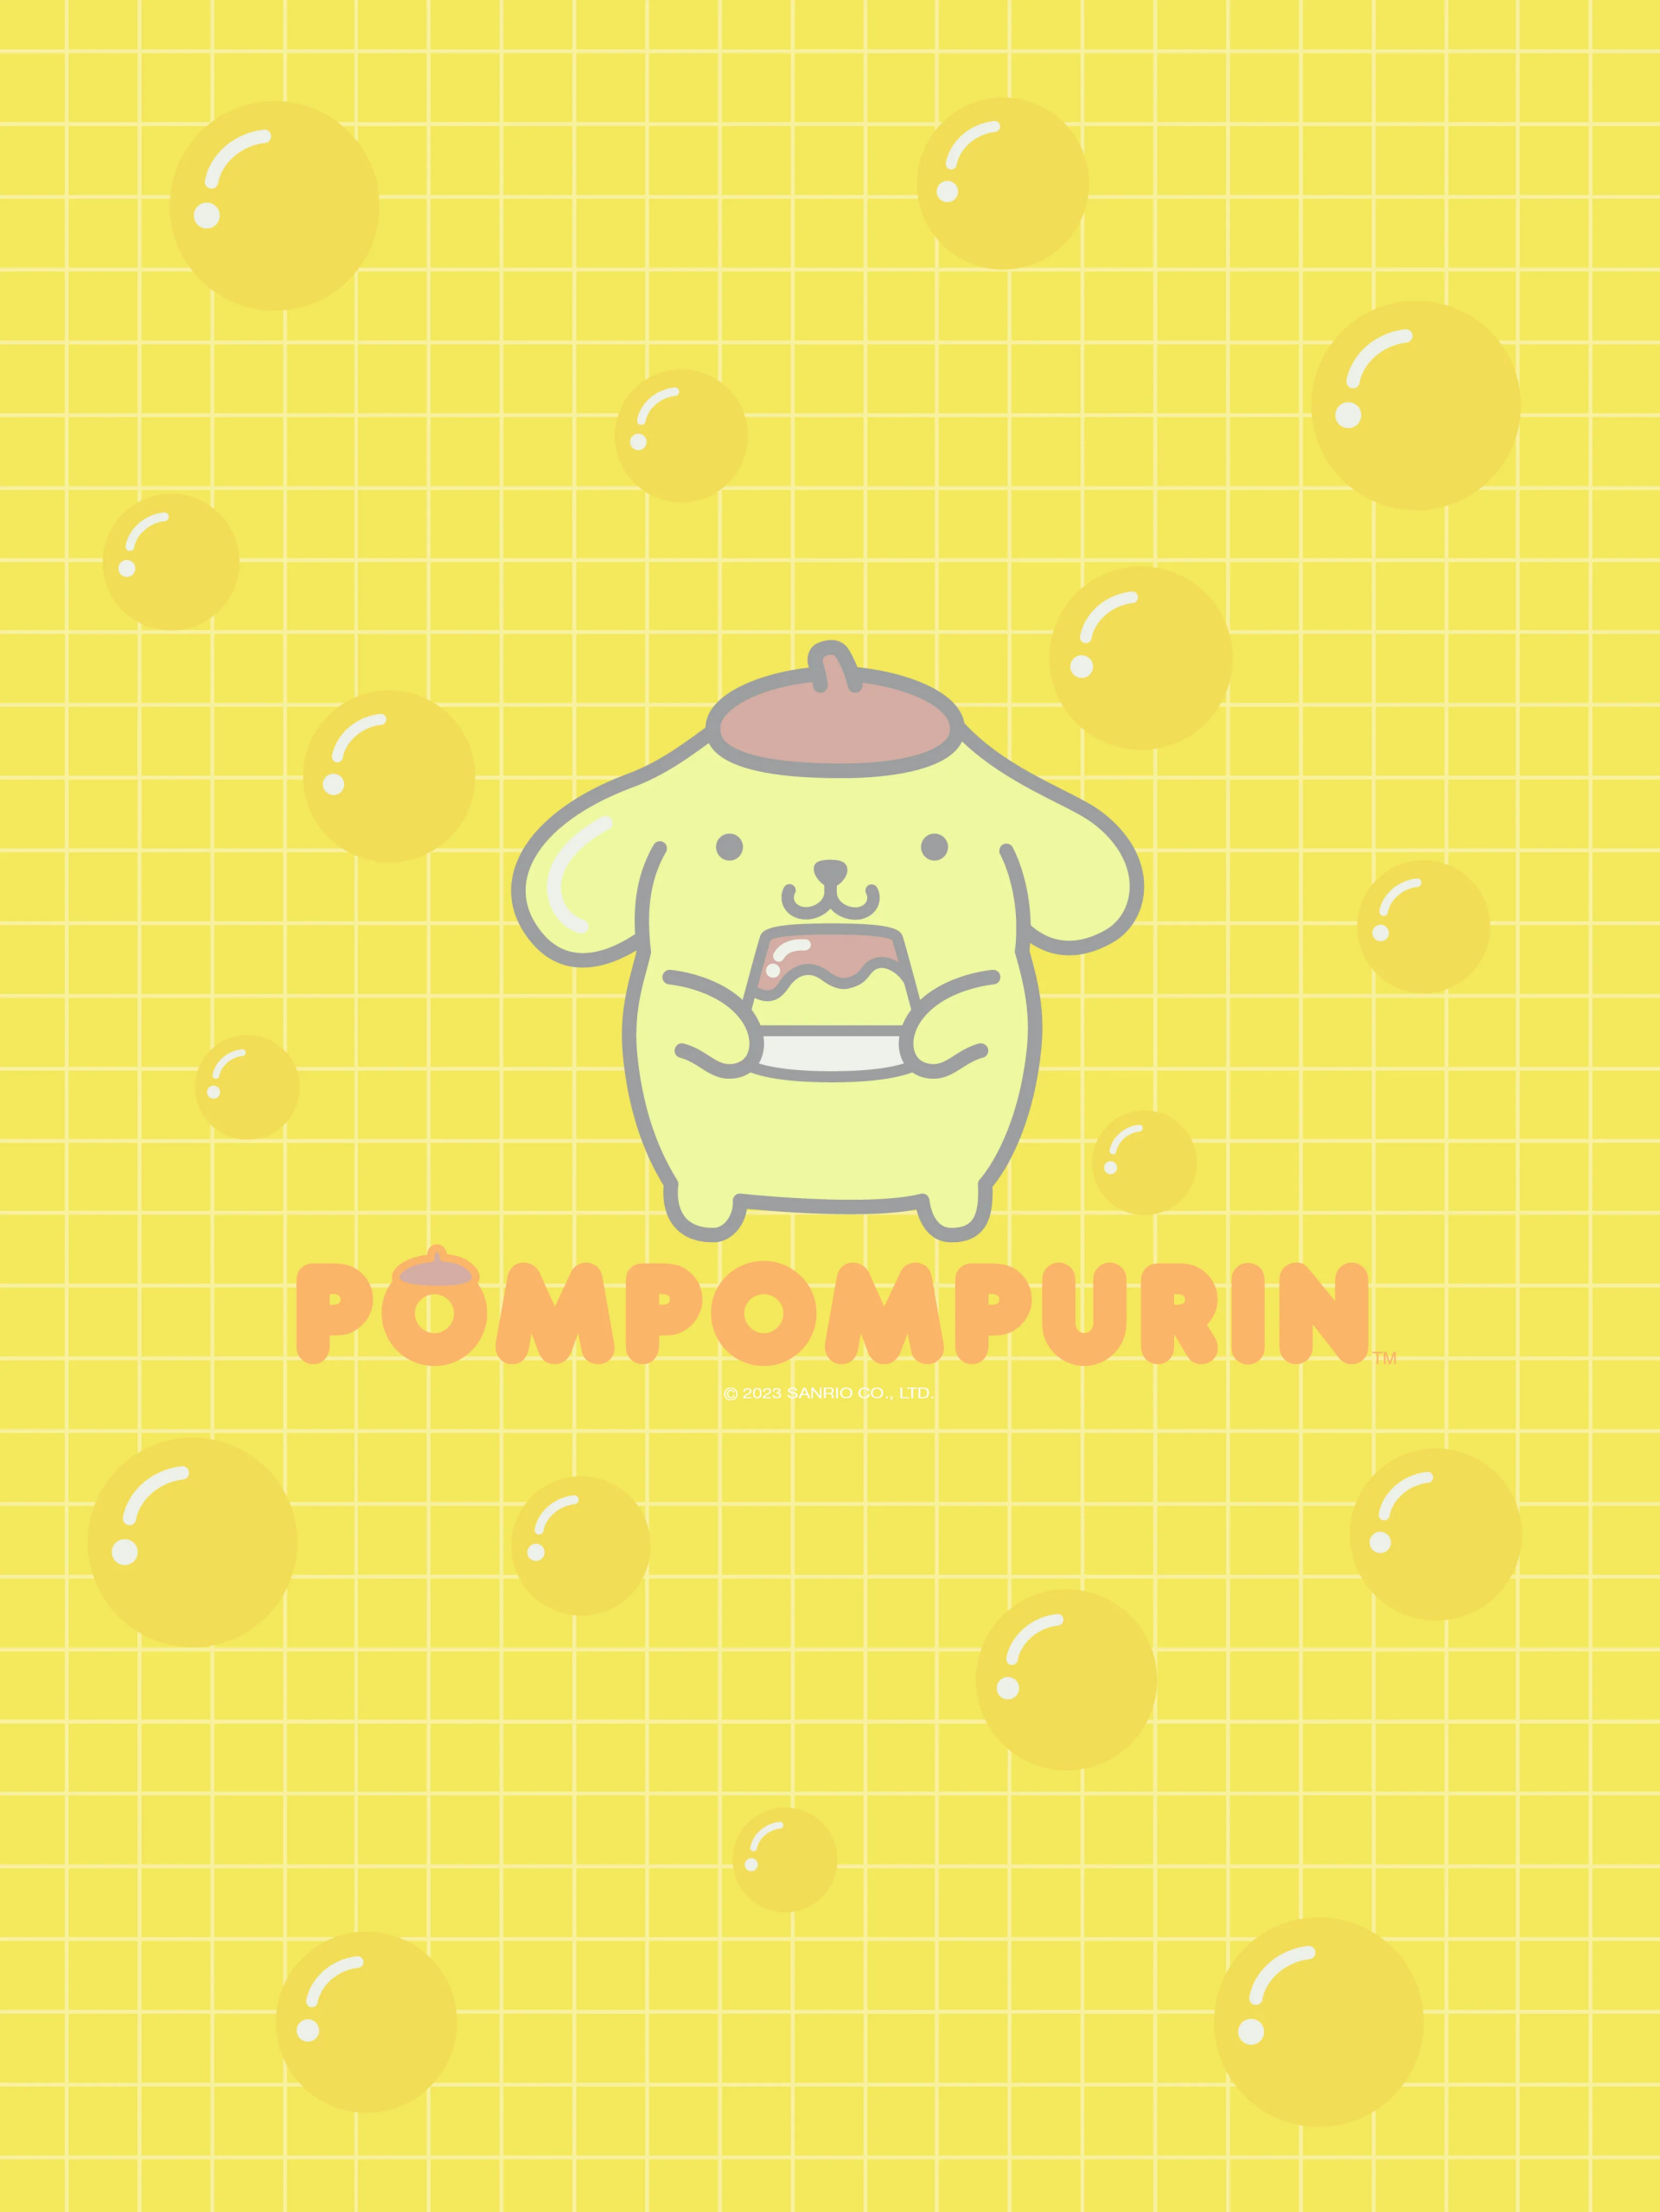 Cute Pompompurin character from Sanrio on a yellow polka dot background, anime style.